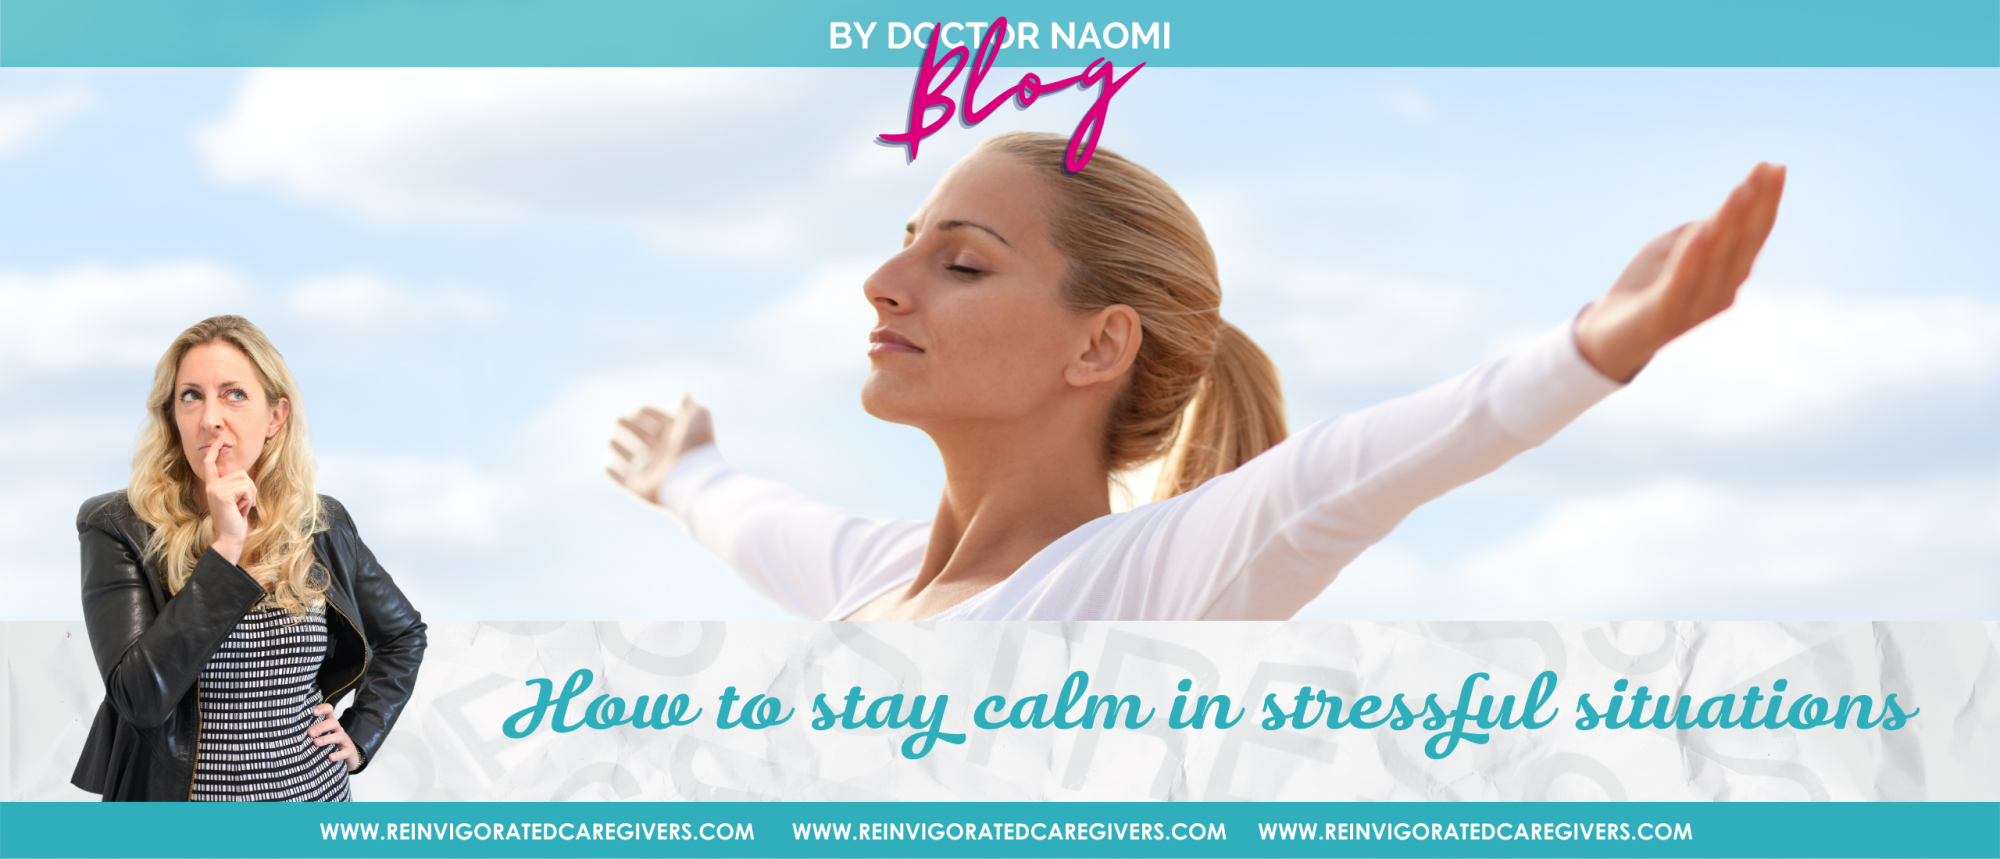 Blog How to stay calm in stressful situations